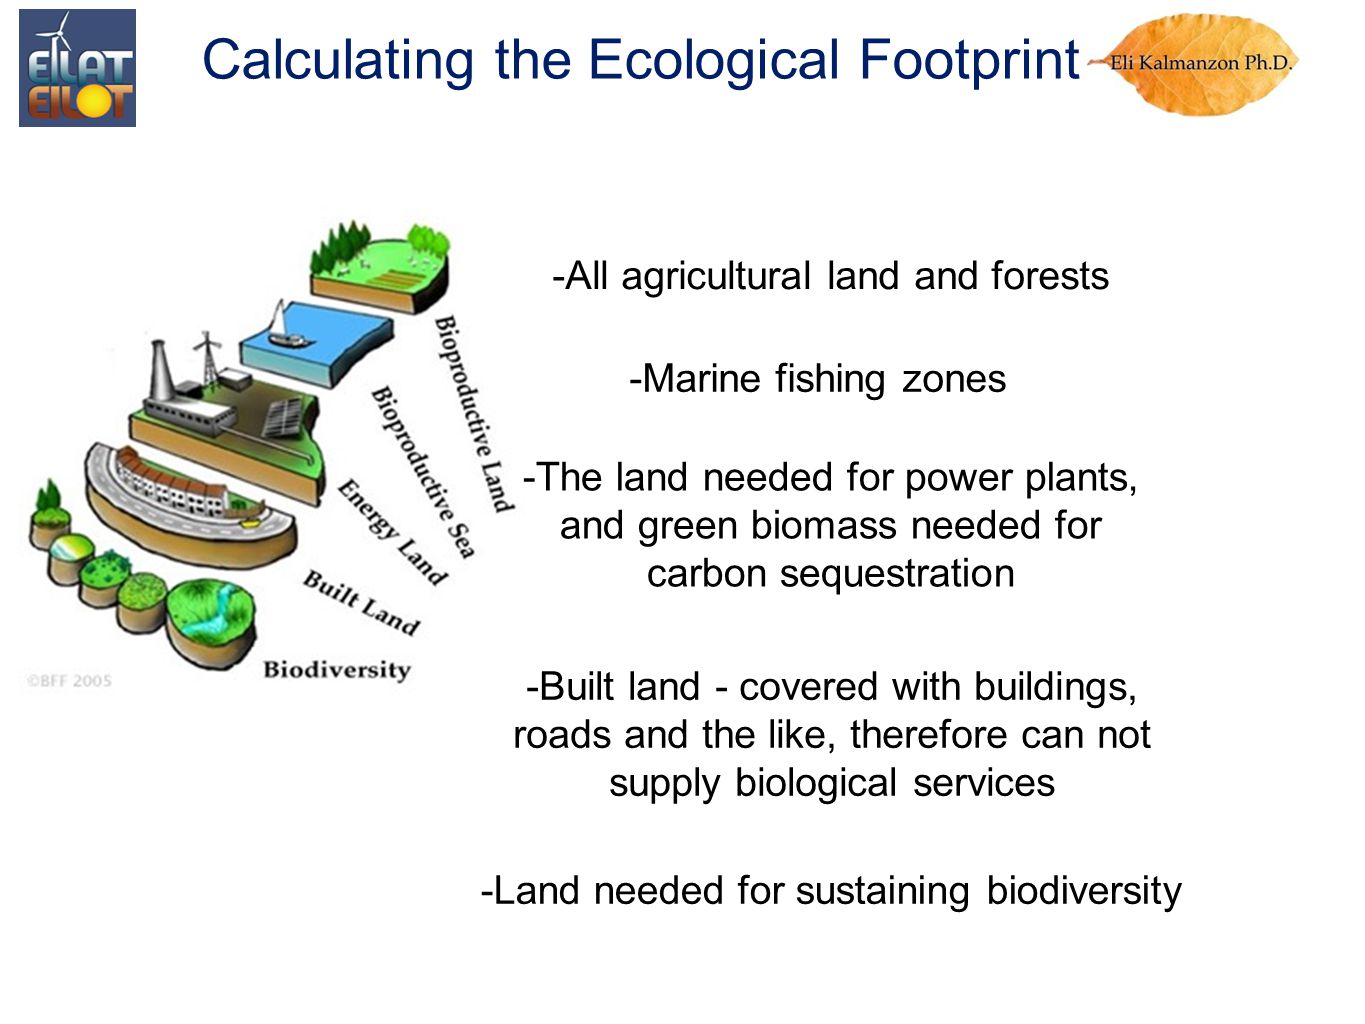 Calculating the Ecological Footprint -All agricultural land and forests -Marine fishing zones -The land needed for power plants, and green biomass needed for carbon sequestration -Built land - covered with buildings, roads and the like, therefore can not supply biological services -Land needed for sustaining biodiversity